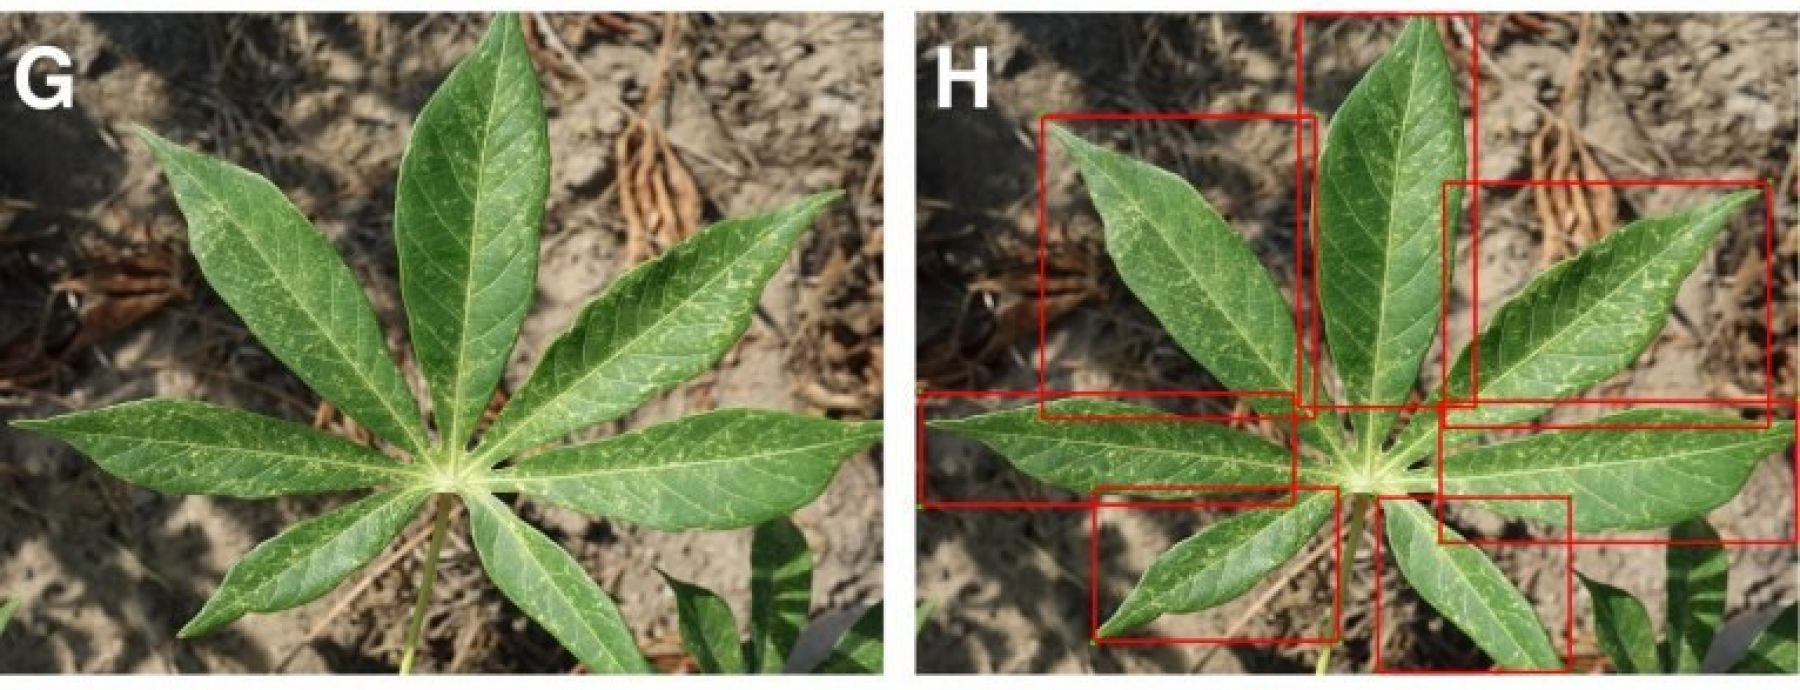 Mobile-Based Machine Learning to Identify Plant Diseases